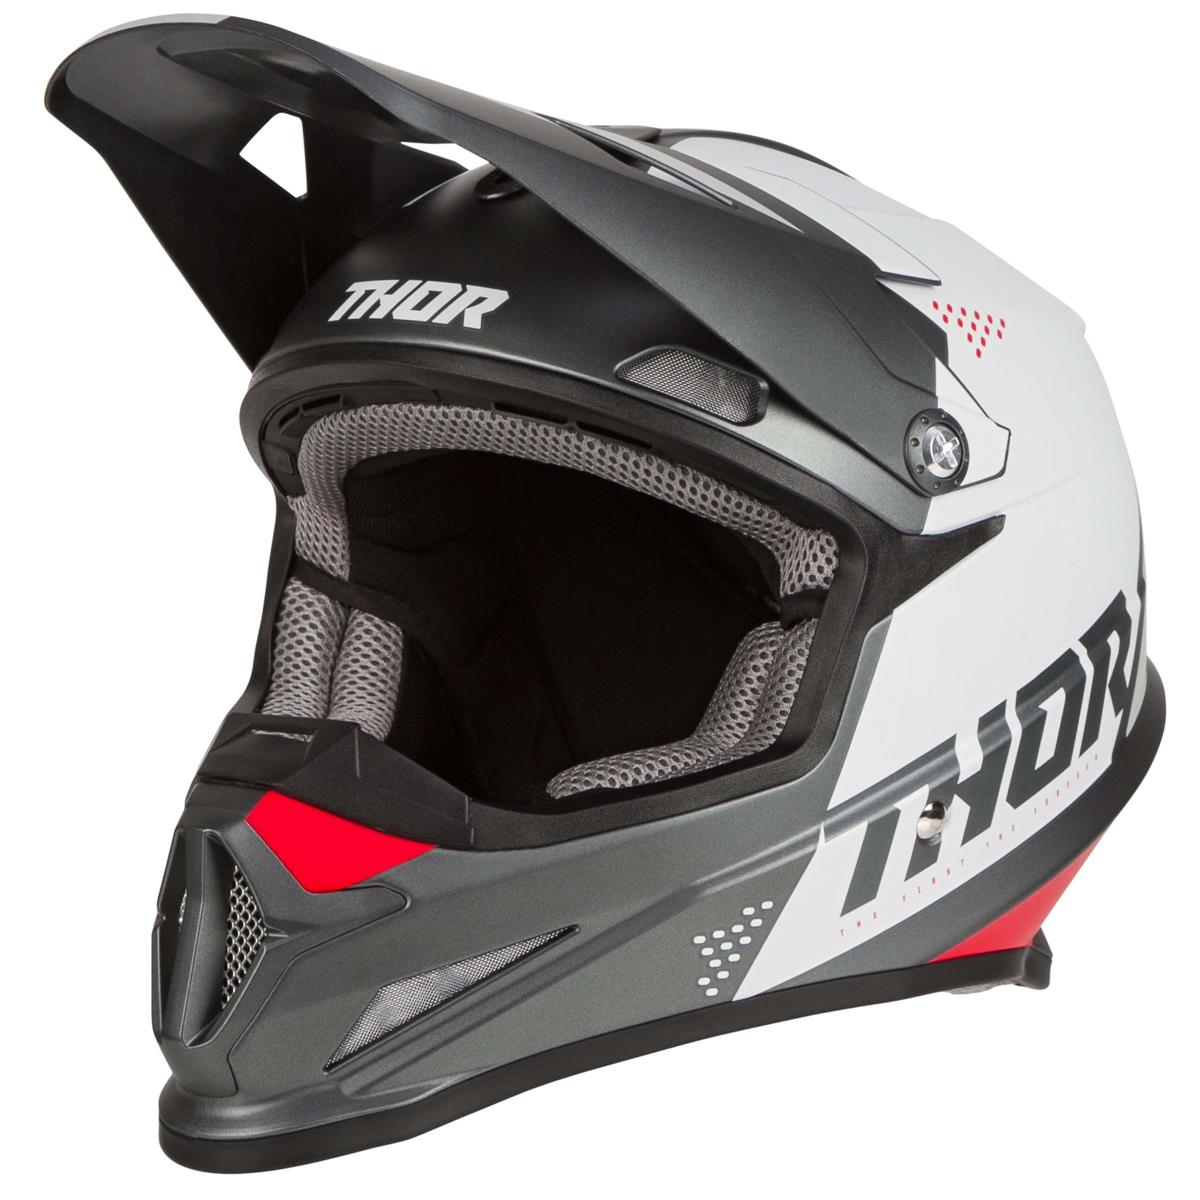 Thor Motocross-Helm Sector Blade Charcoal/Weiß